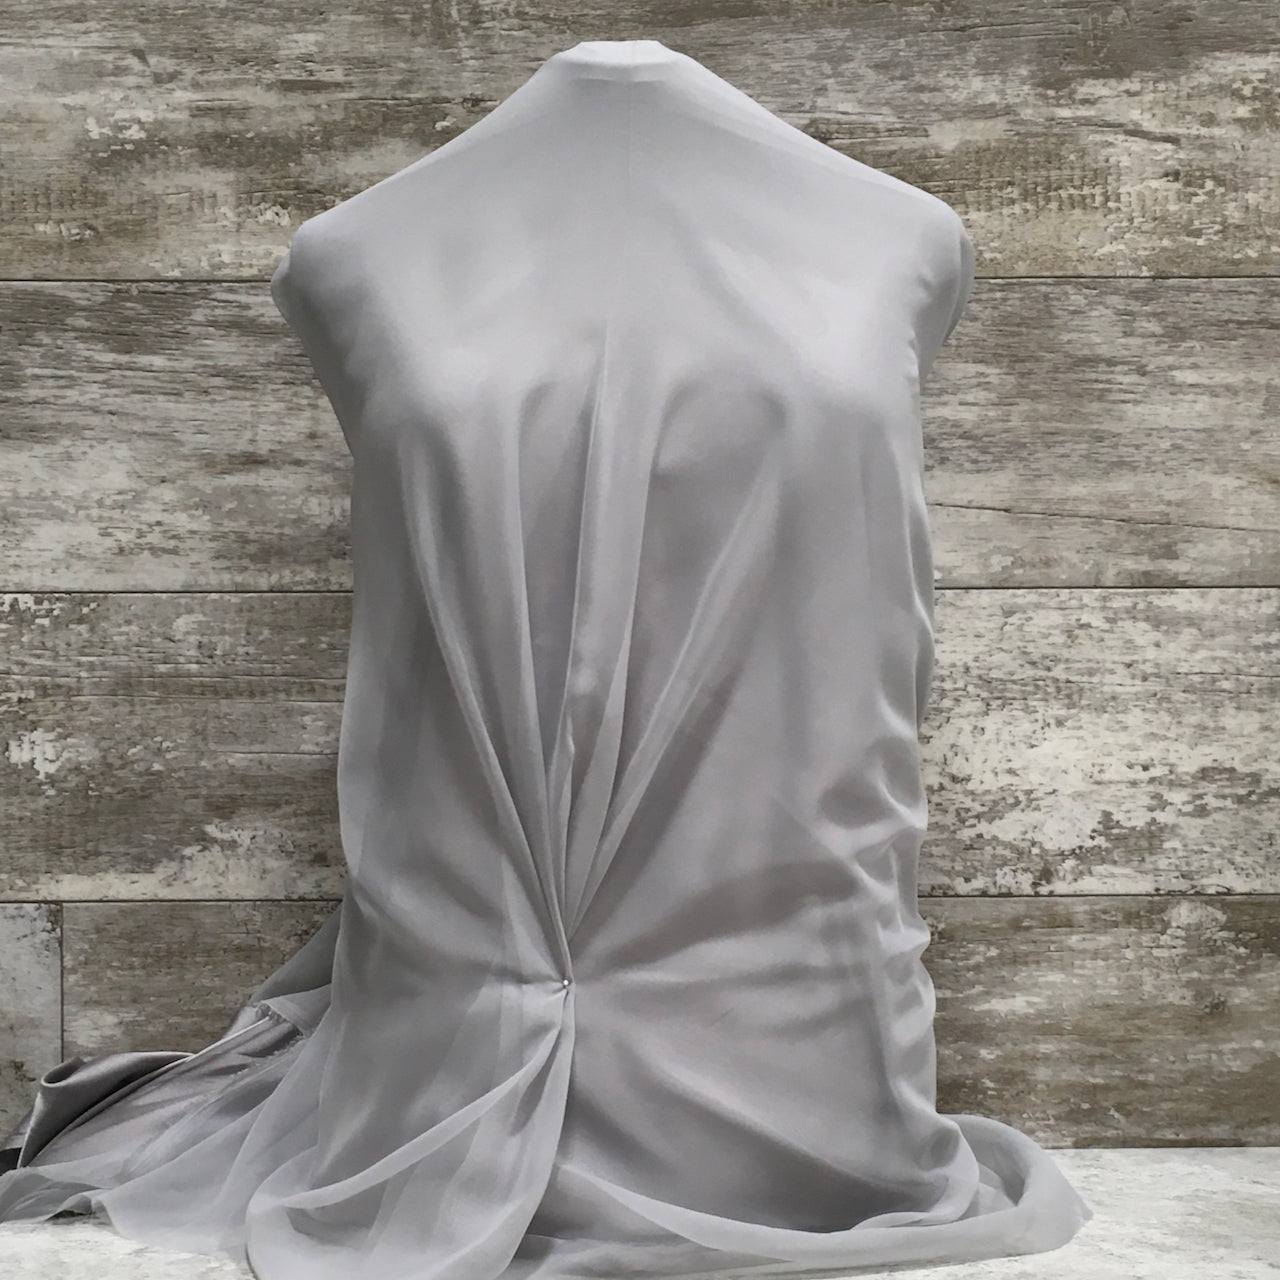 Polyester Chiffon / Silver | Sold by the half yard